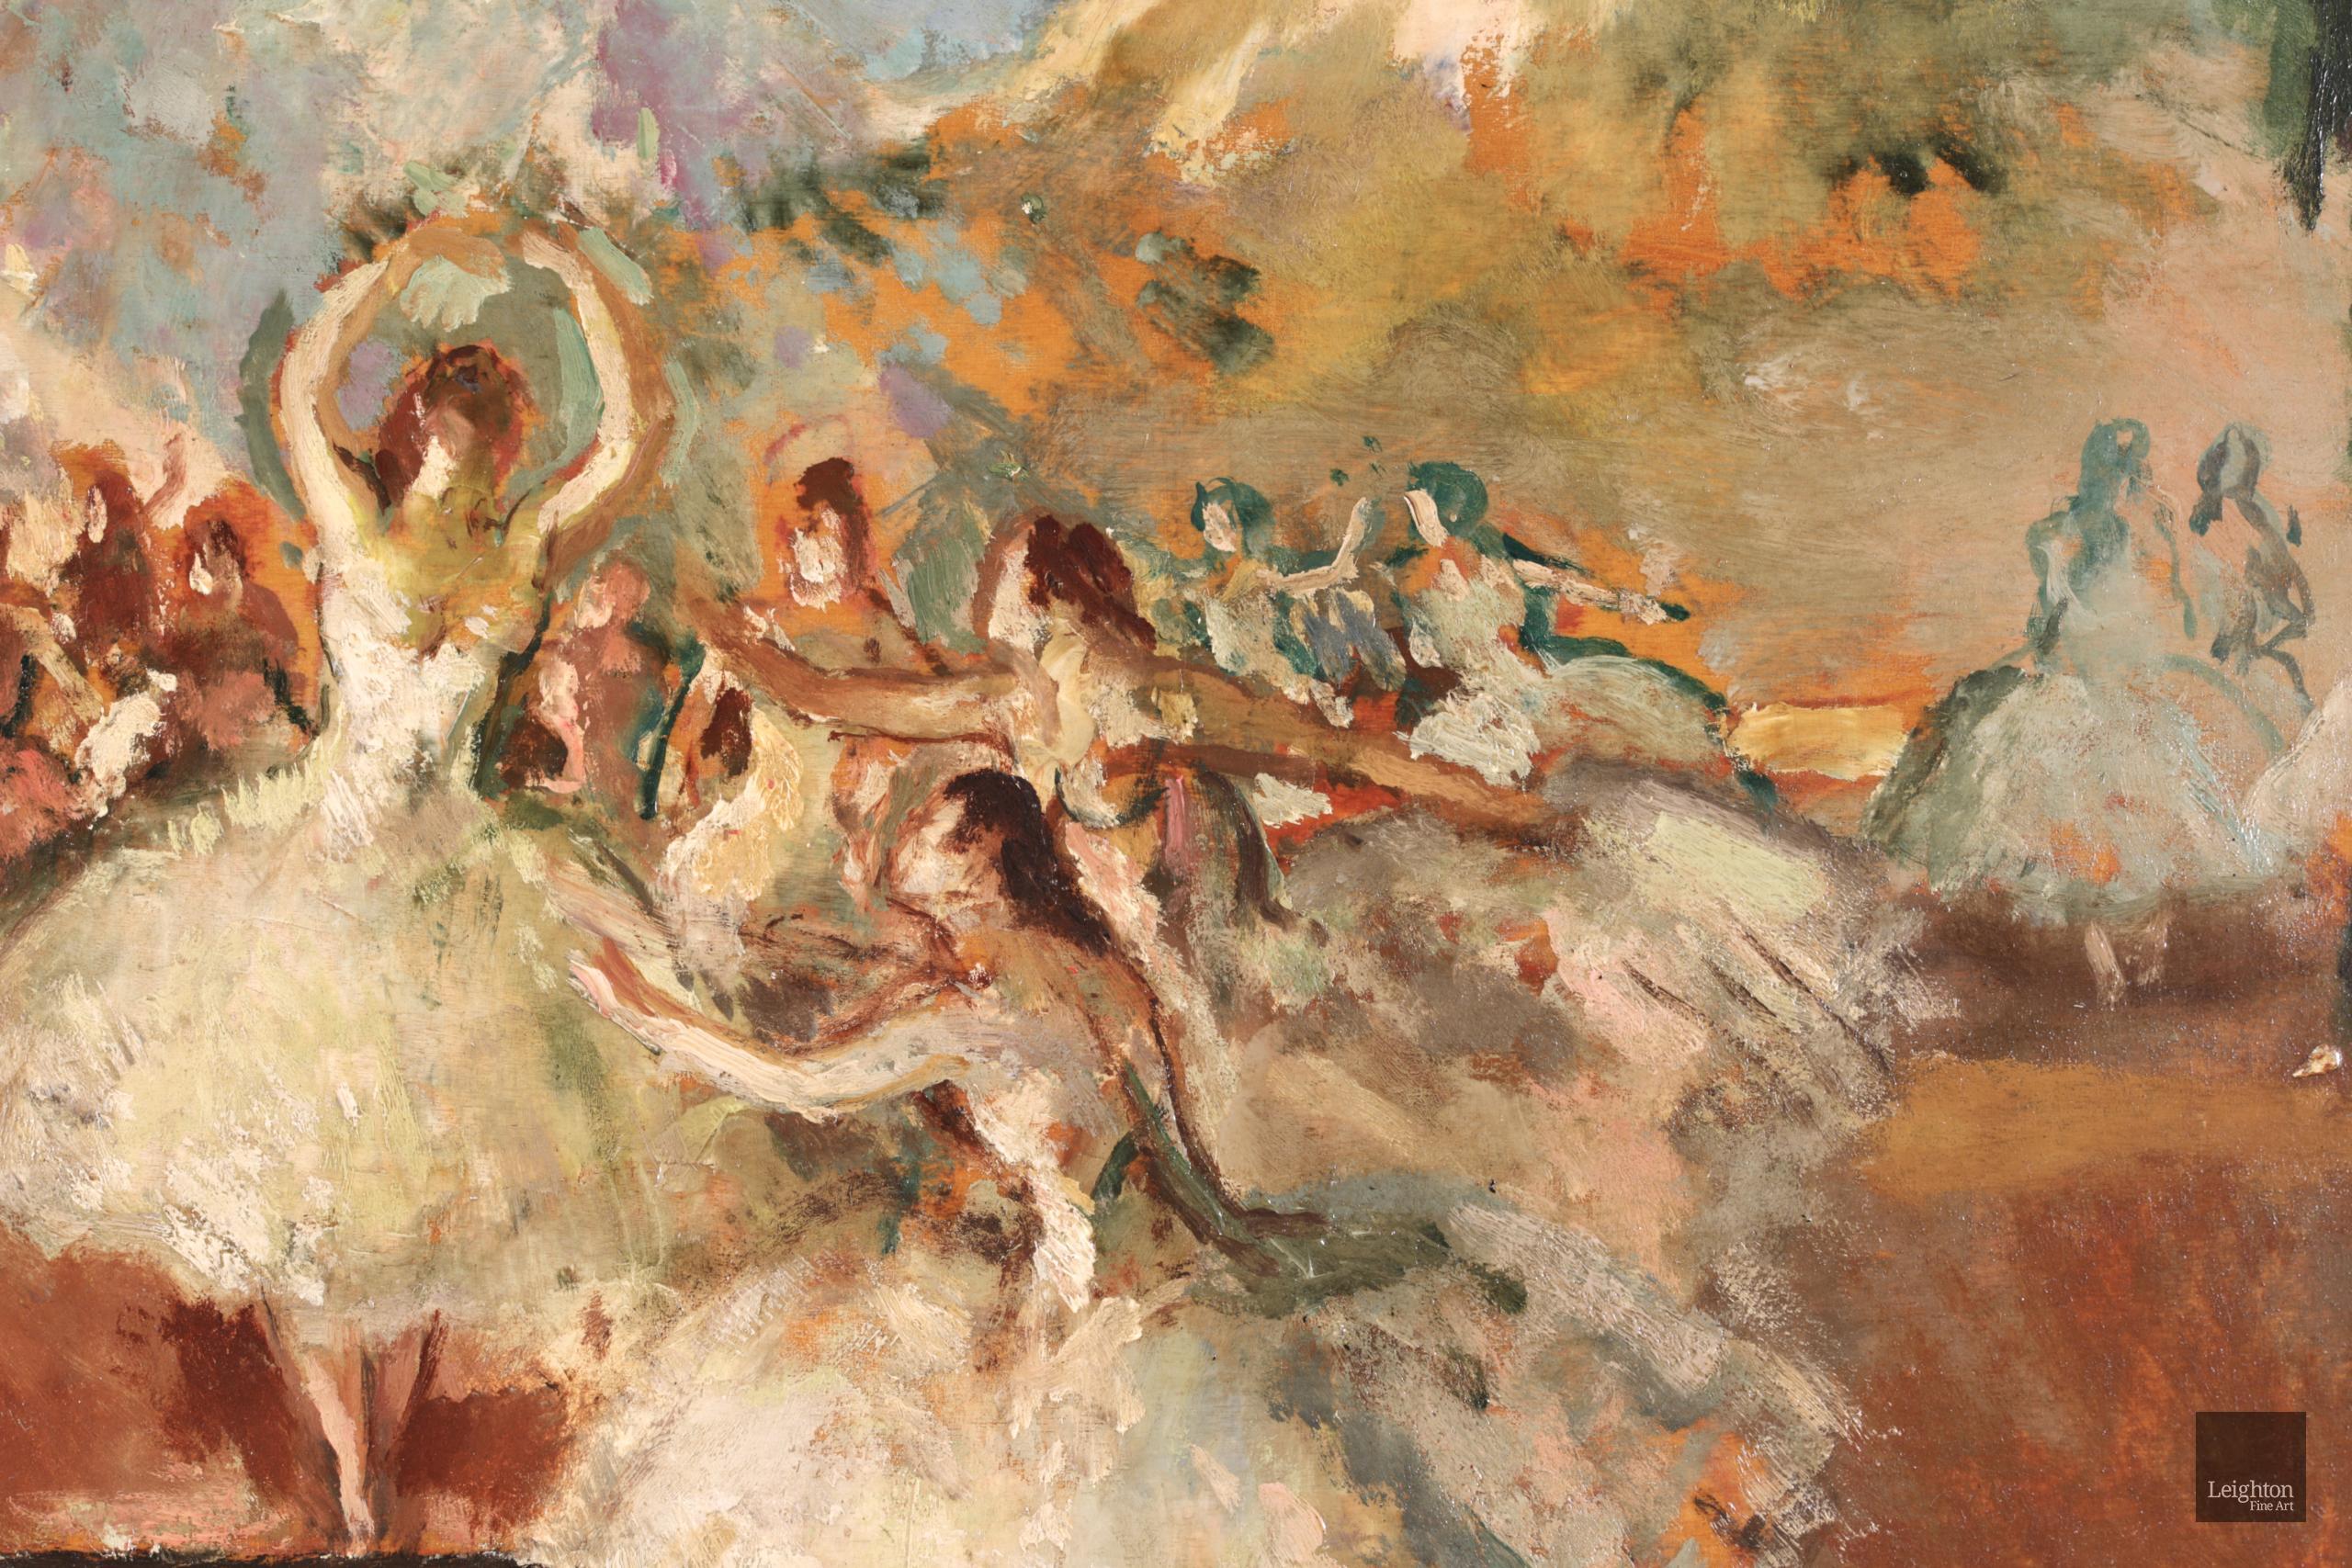 Dancers on a Stage - Post Impressionist Oil, Figures in Interior - Marcel Cosson - Beige Interior Painting by Jean-Louis-Marcel Cosson